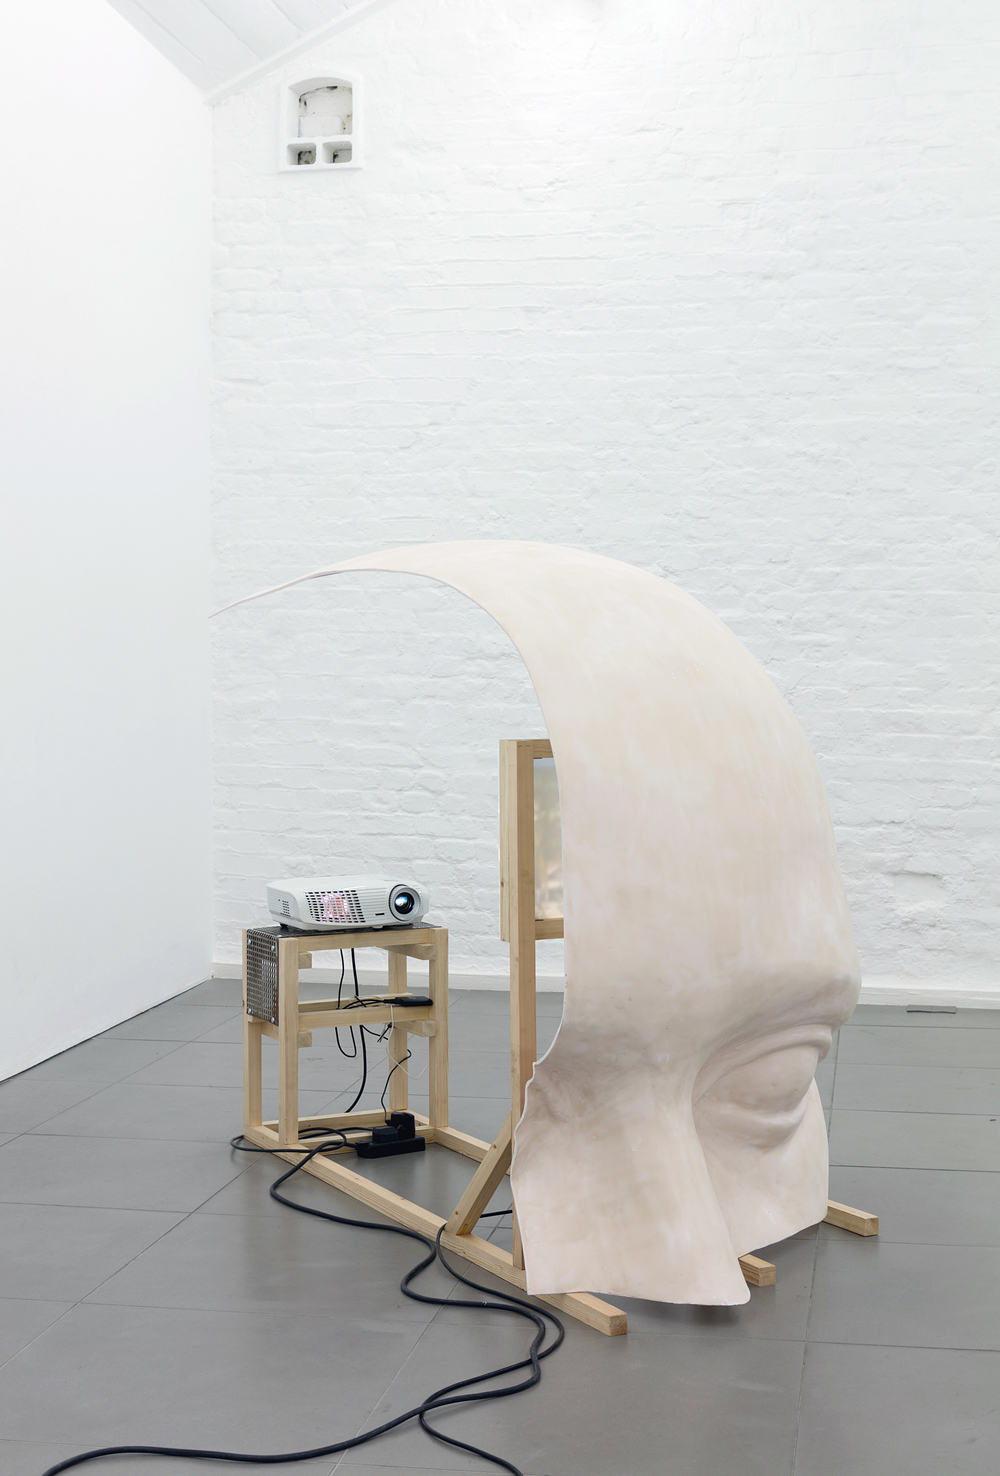 Installation view, Anne de Vries, Submission, Cell Project Space